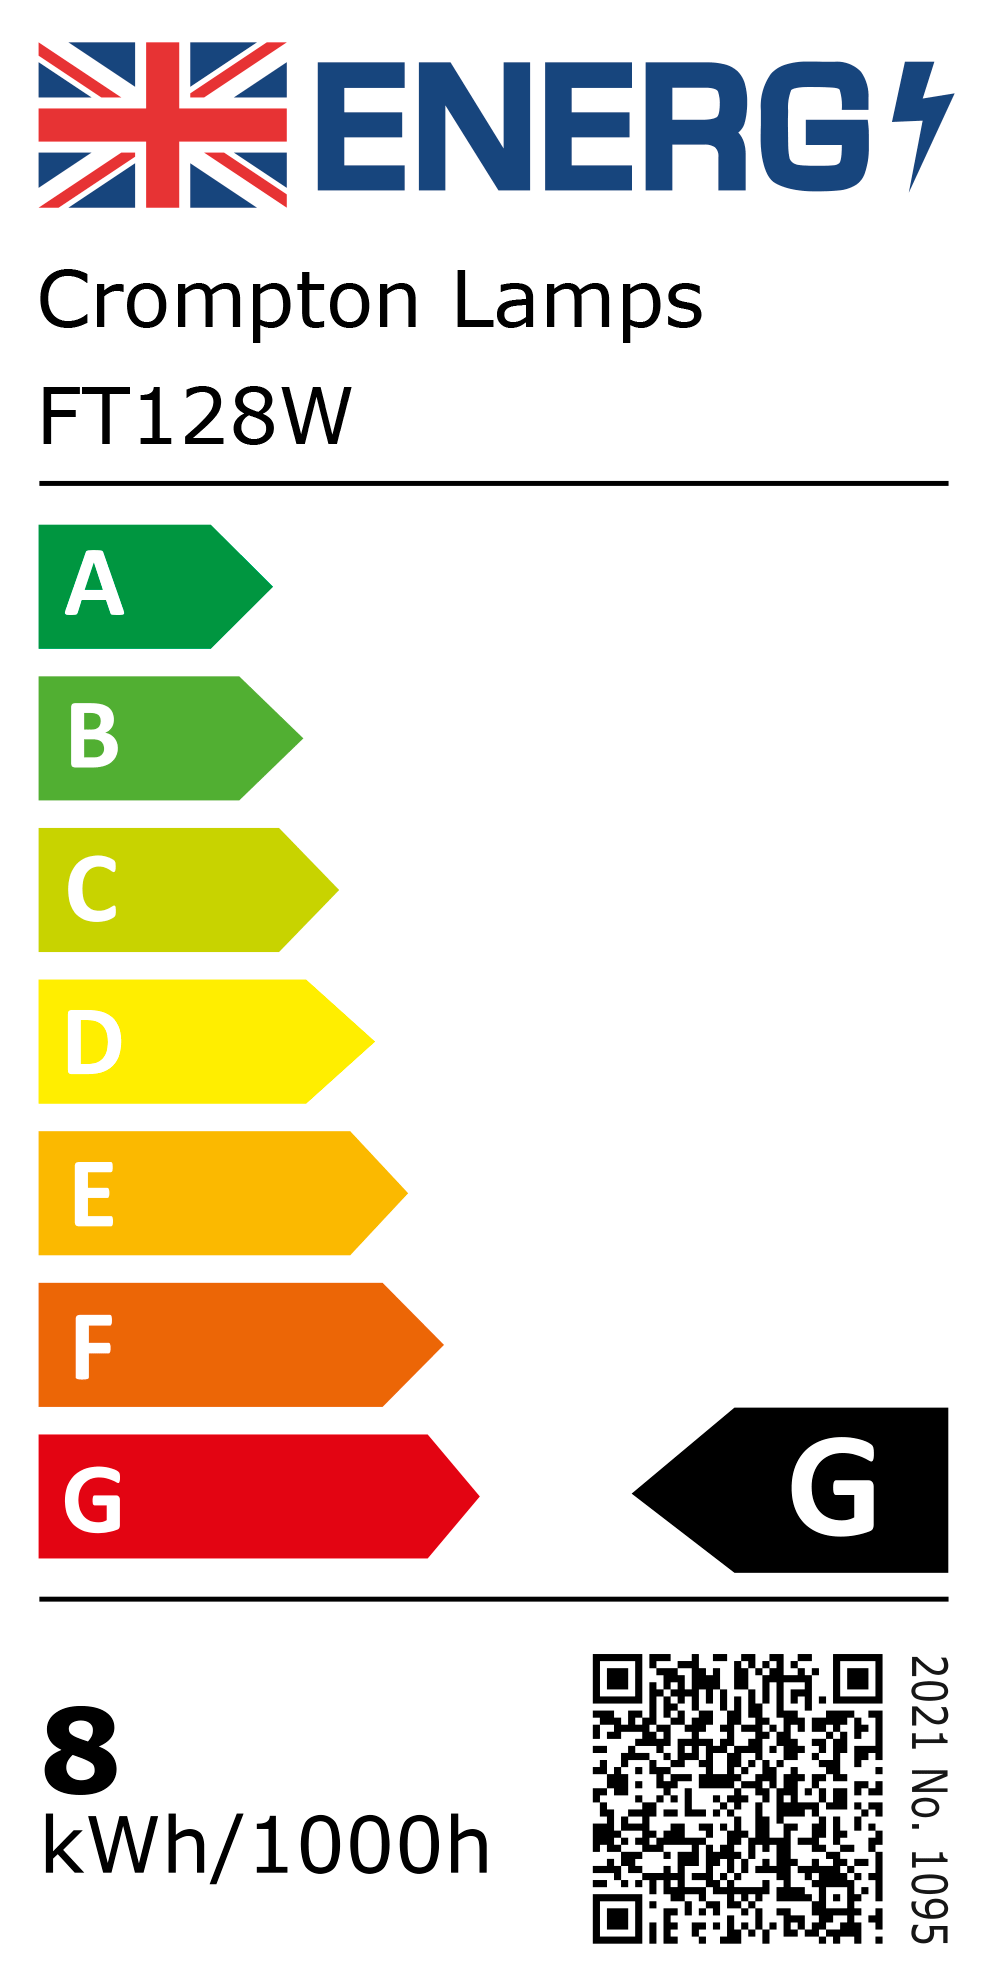 New 2021 Energy Rating Label: Stock Code FT128W